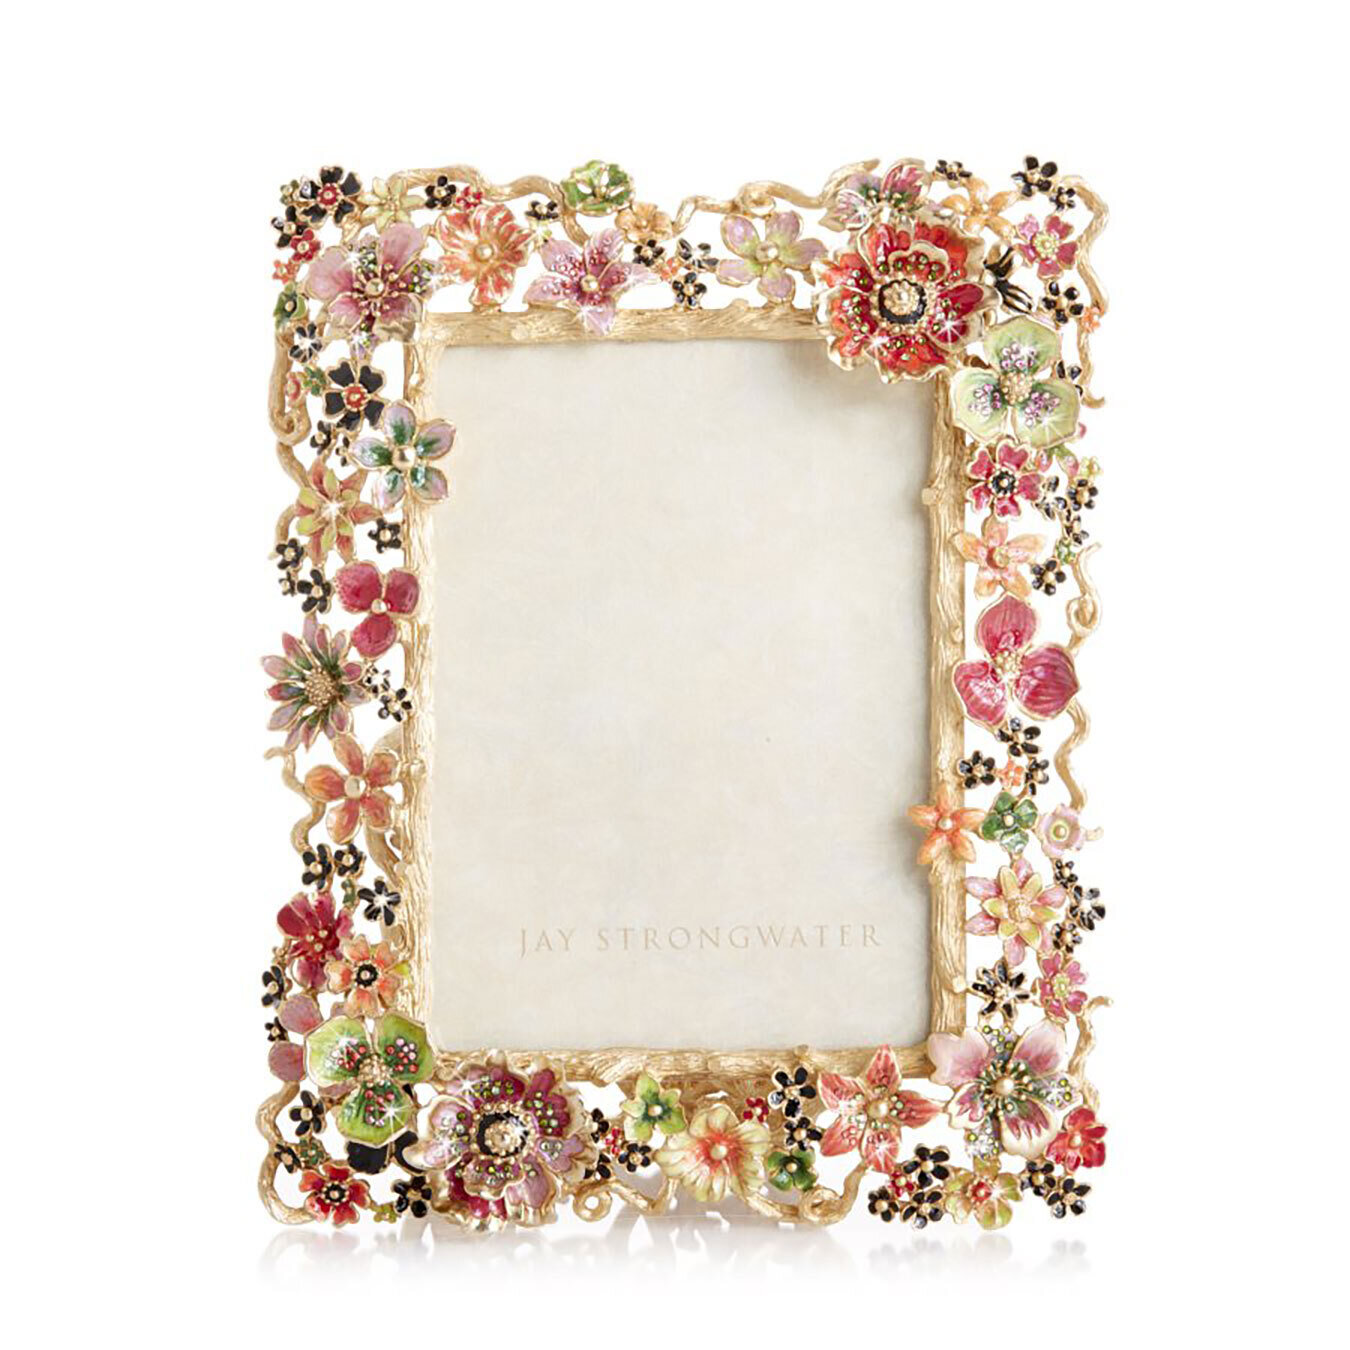 Jay Strongwater Cluster Floral 5" x 7" Picture Frame SPF5859-250